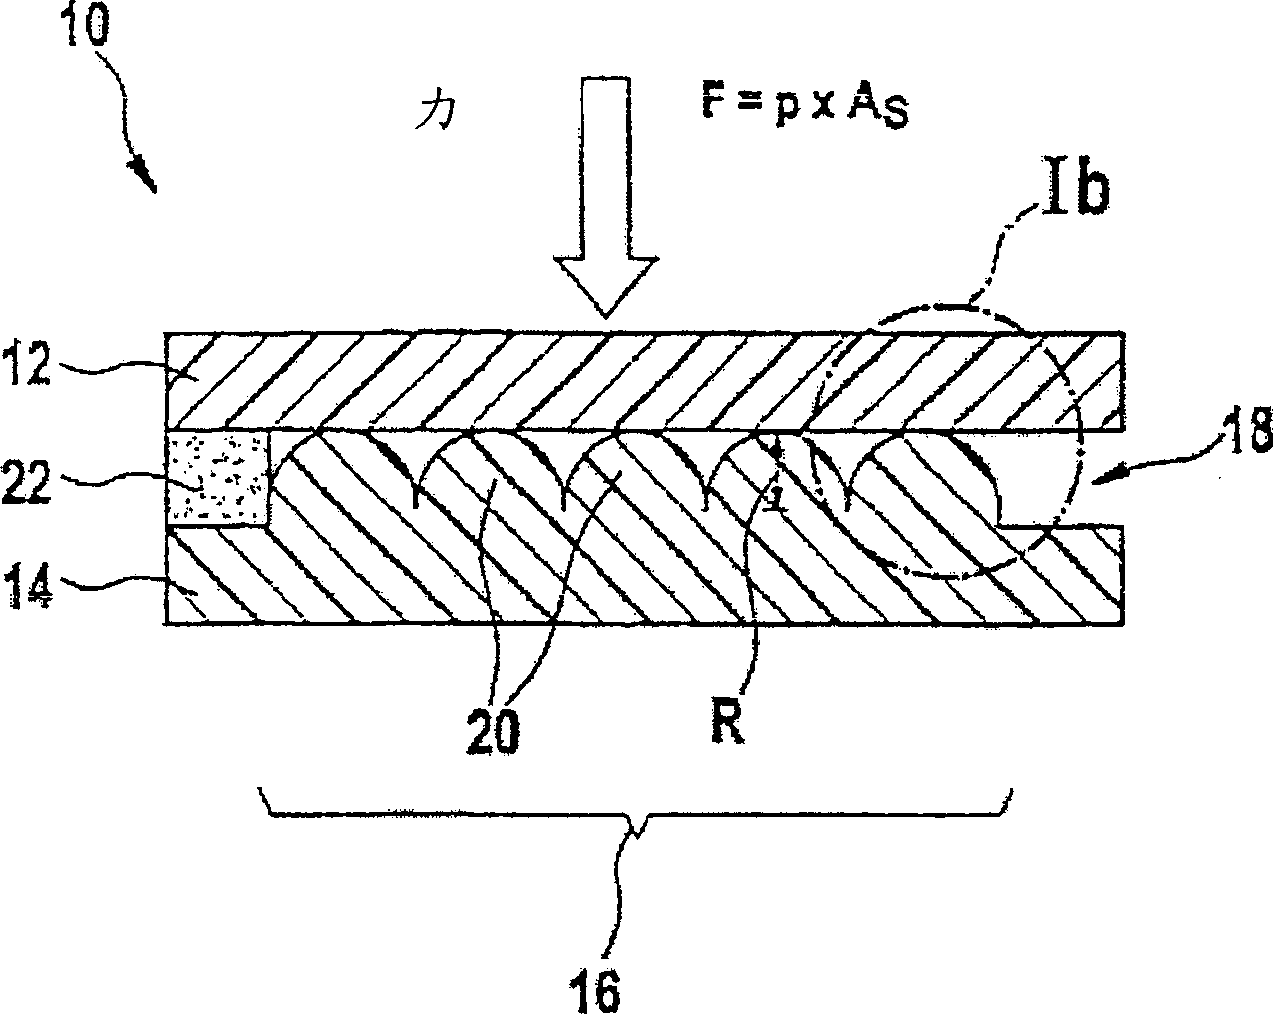 Pressure sensor comprising an elastic sensor layer with a microstructured surface